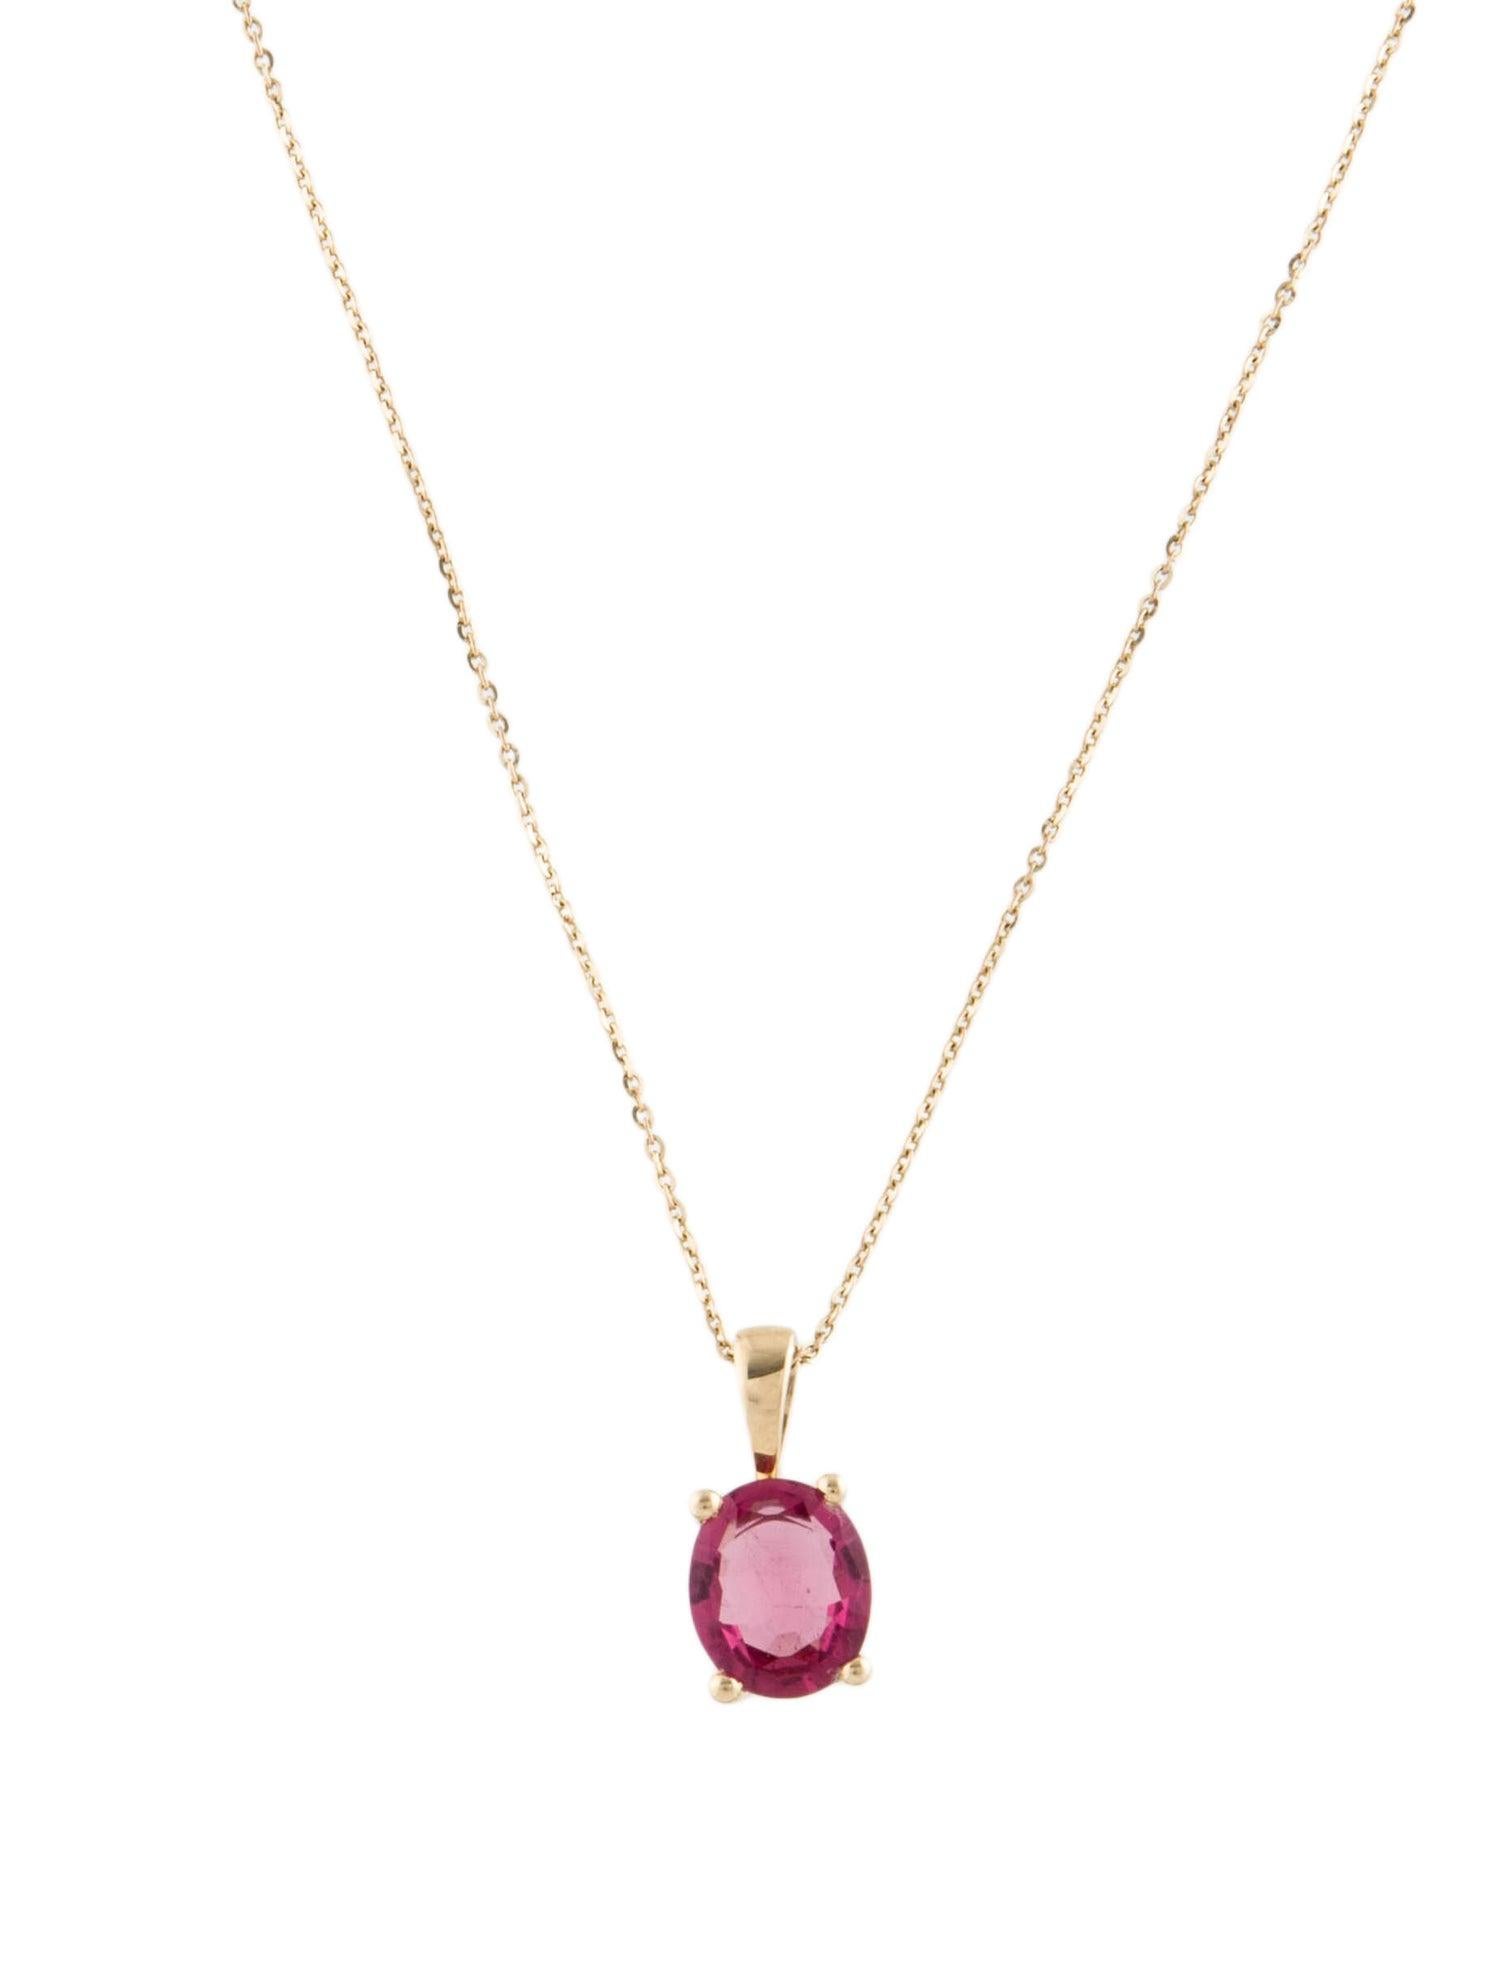 Luxury 14K Tourmaline Pendant Necklace - Stunning Gemstone Statement Jewelry In New Condition For Sale In Holtsville, NY